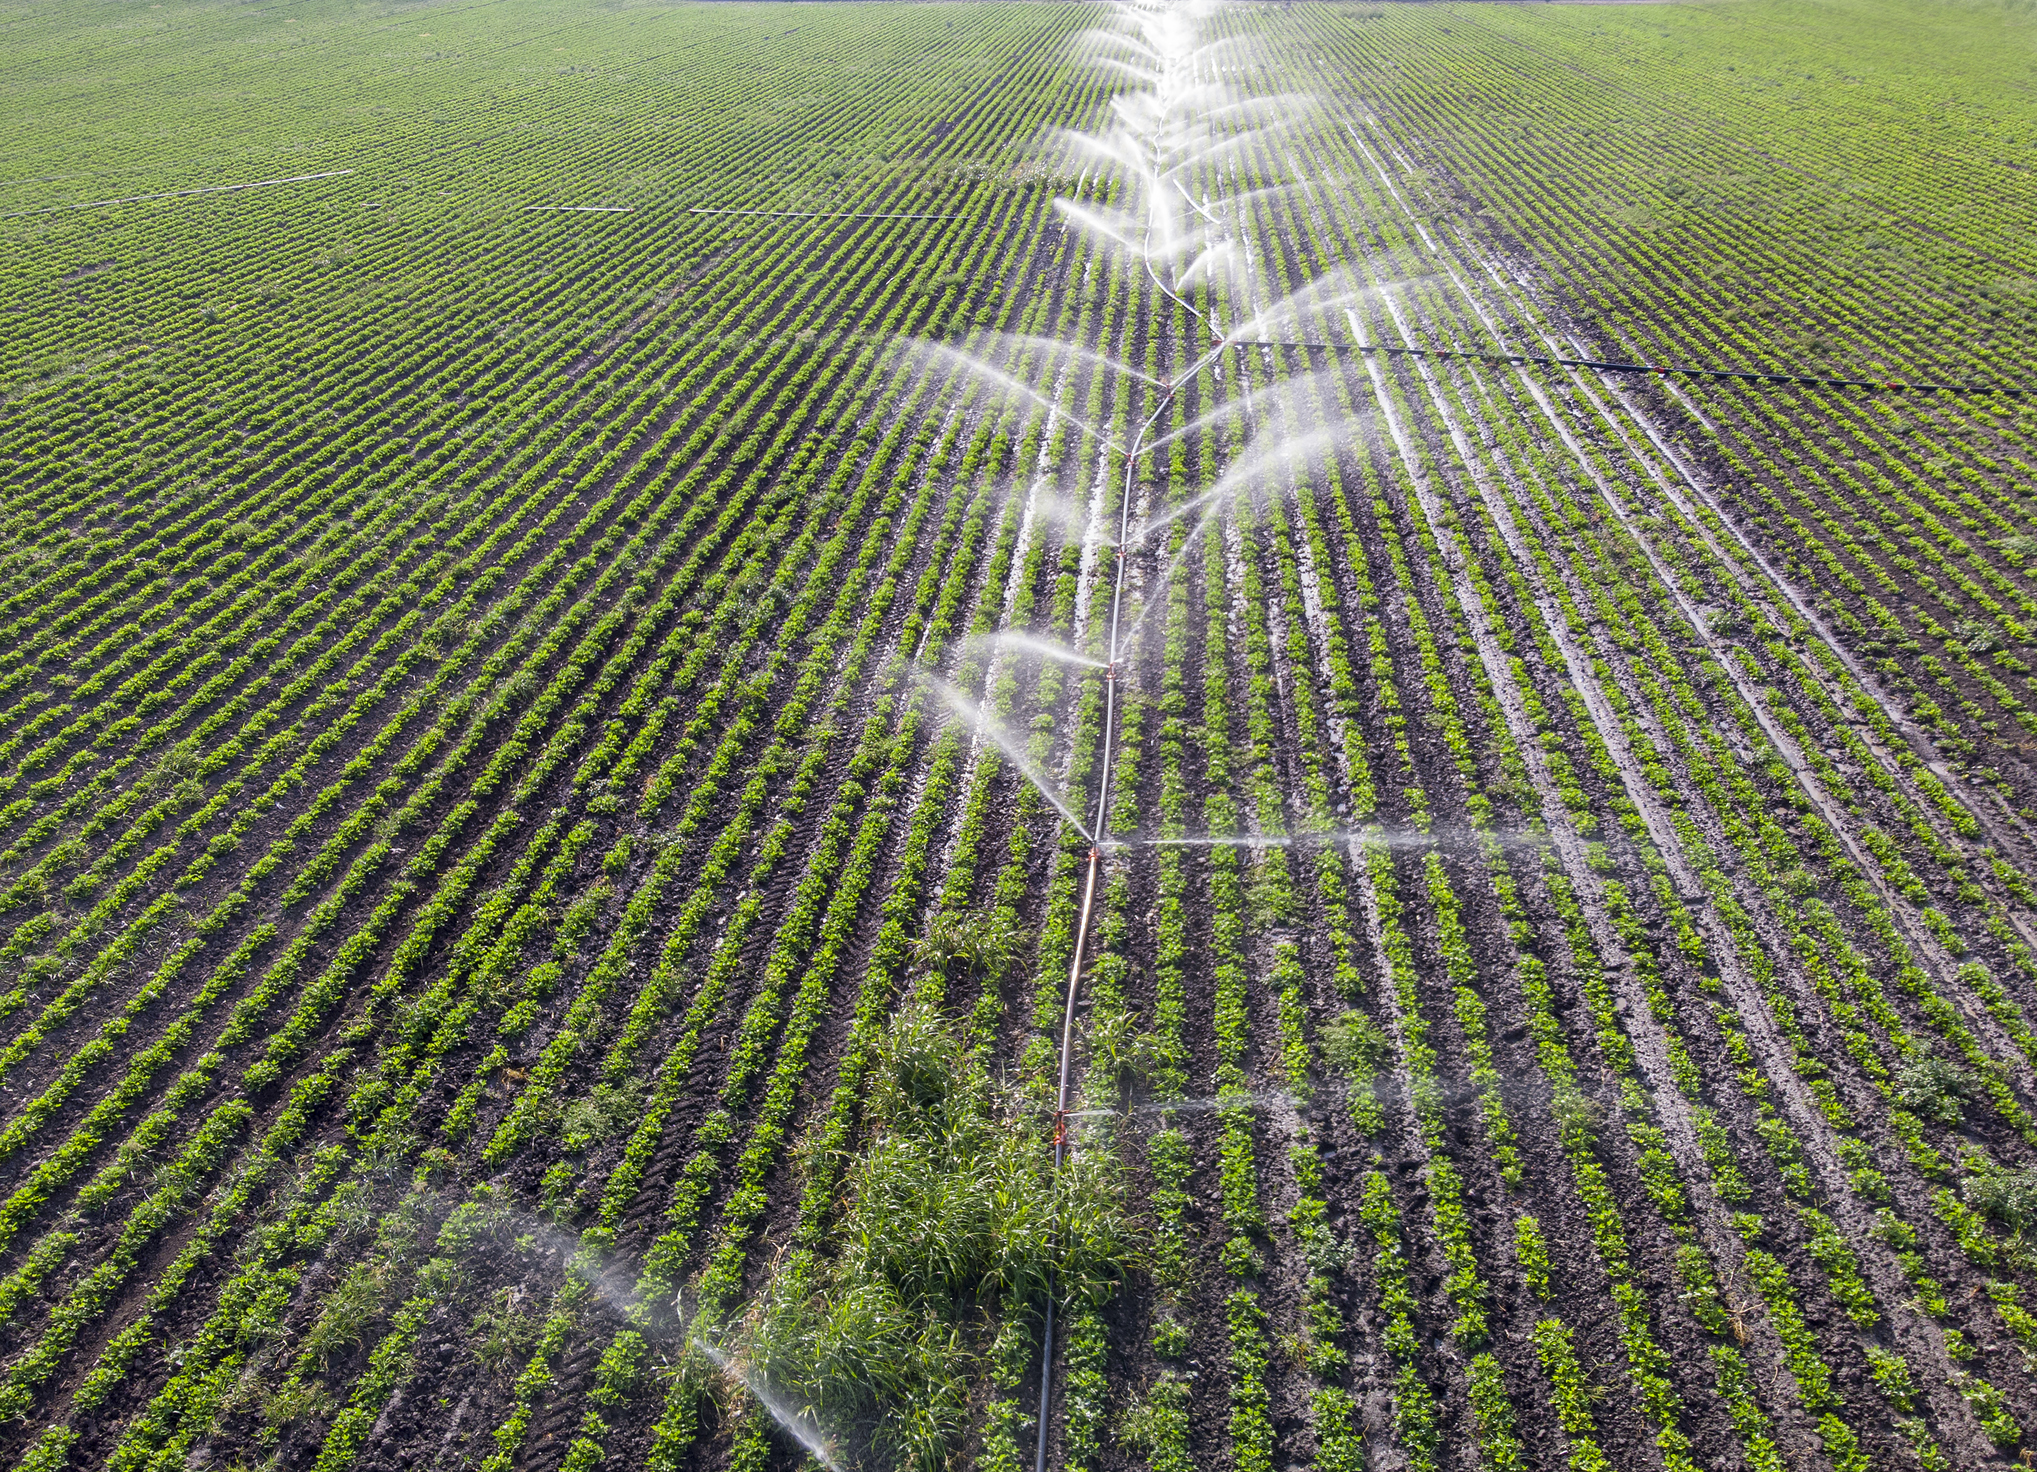 Center pivot irrigation systems require regular maintenance, calibration, and monitoring to ensure even water distribution that maximizes crop yields.